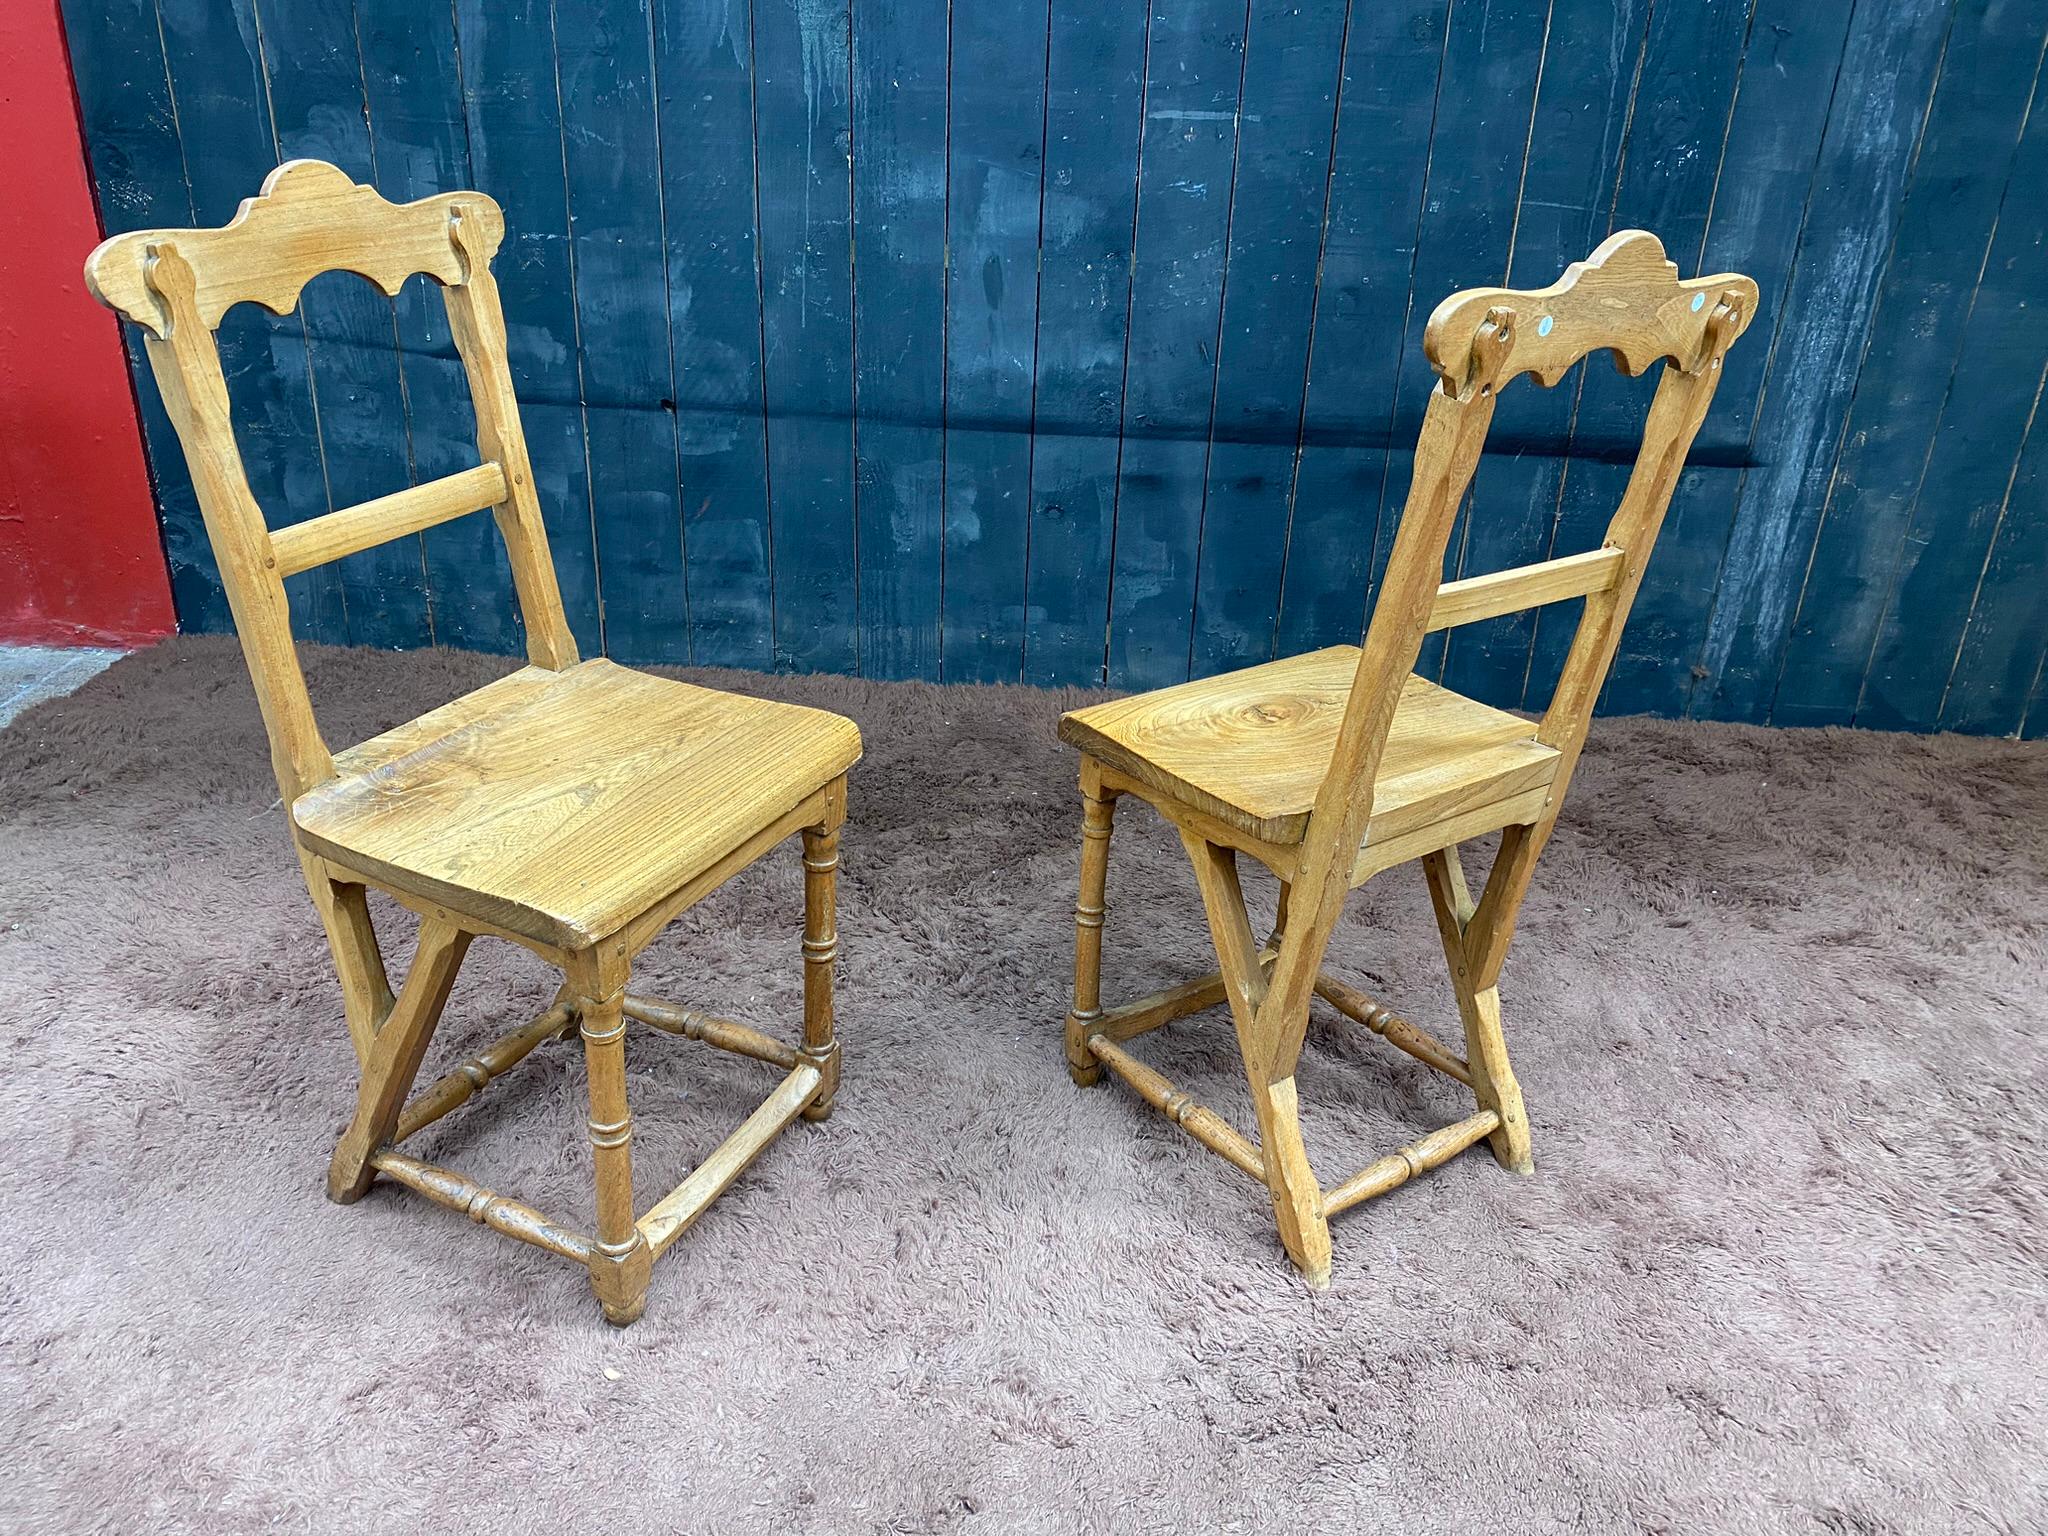 6 Mountain Chairs, in ELM, circa 1900 For Sale 8